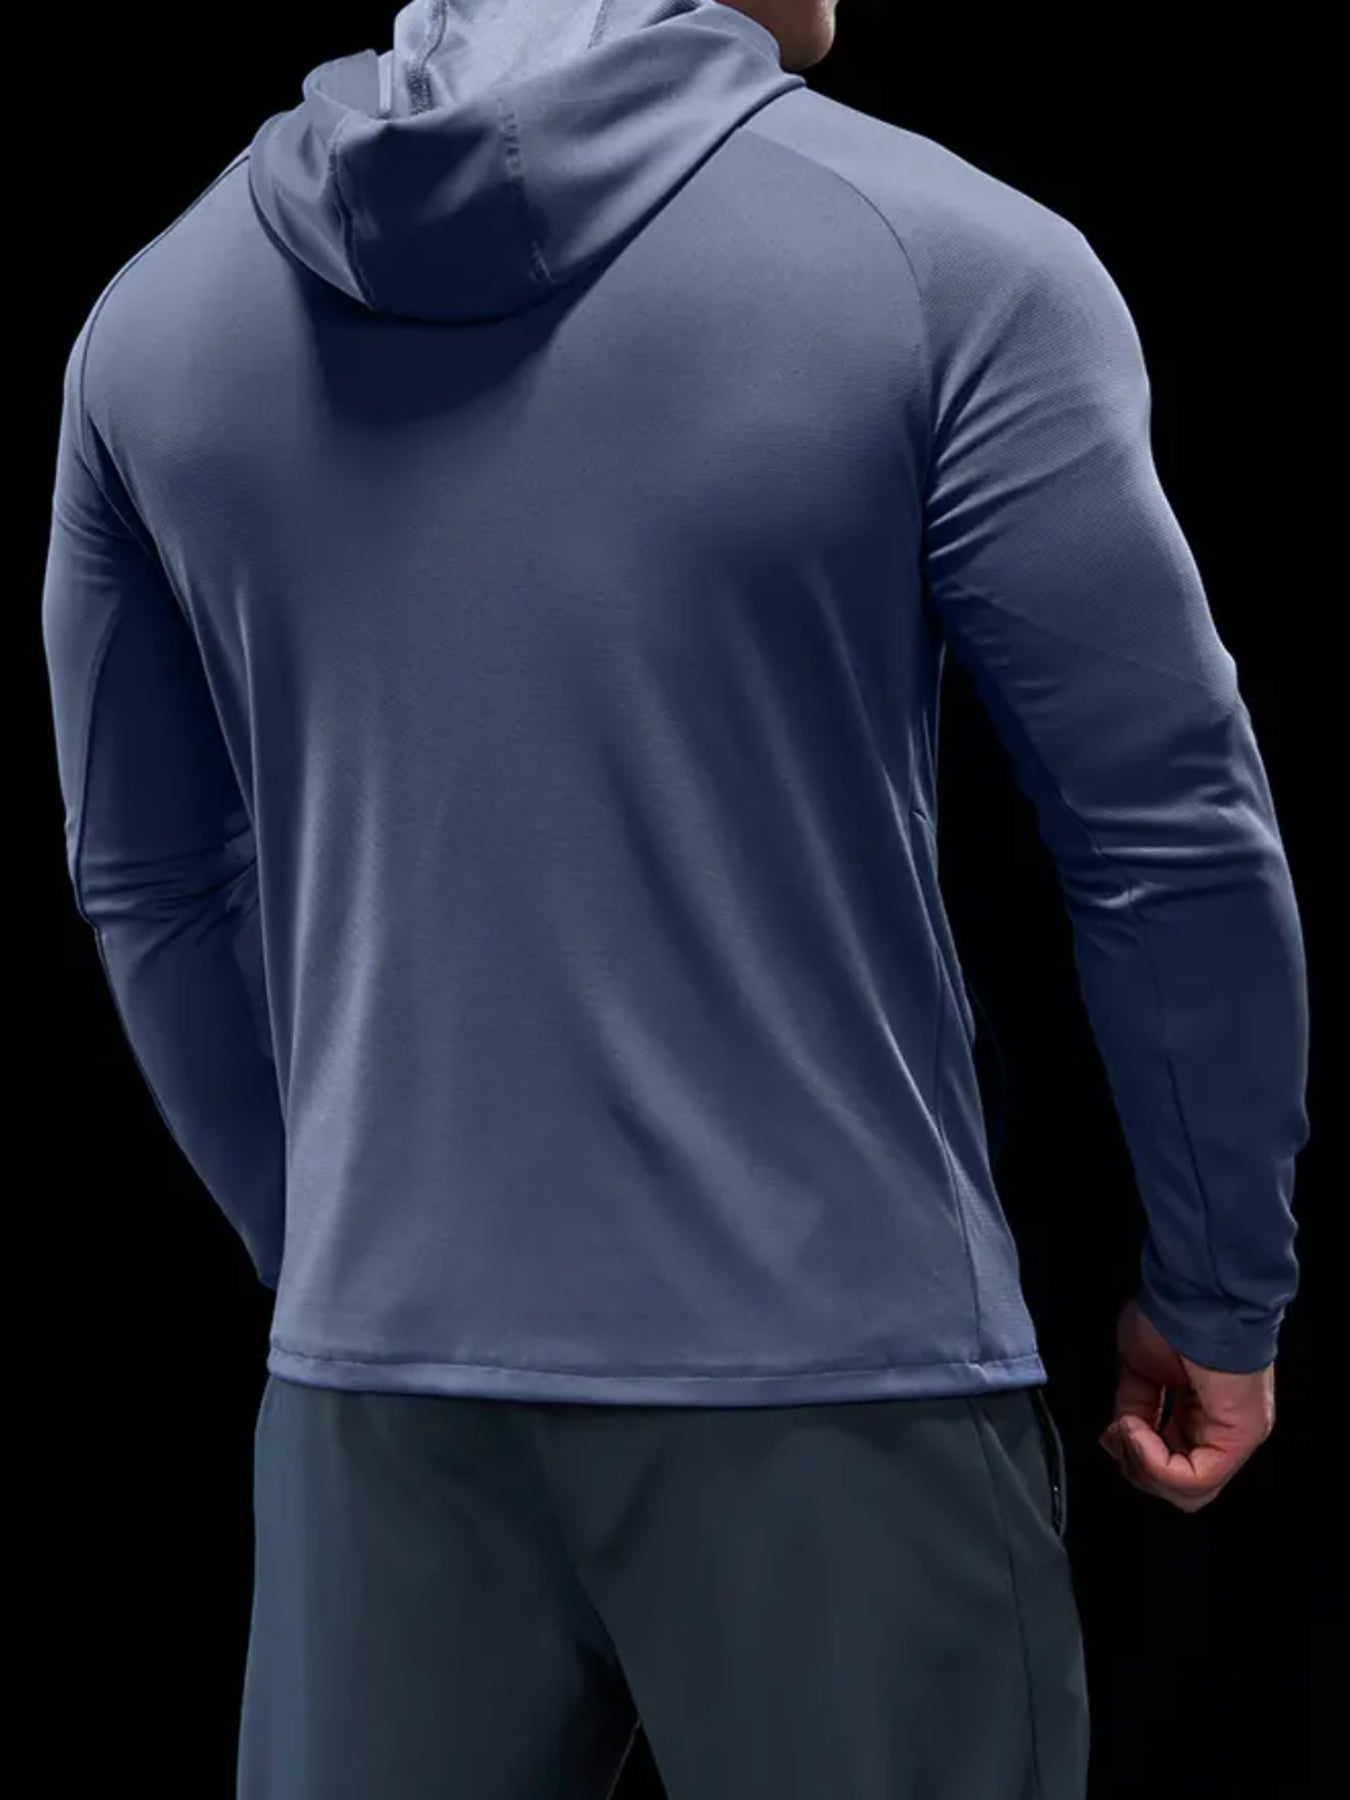 ElevateMotion Quick Dry Sports Fitness Hooded Jacket